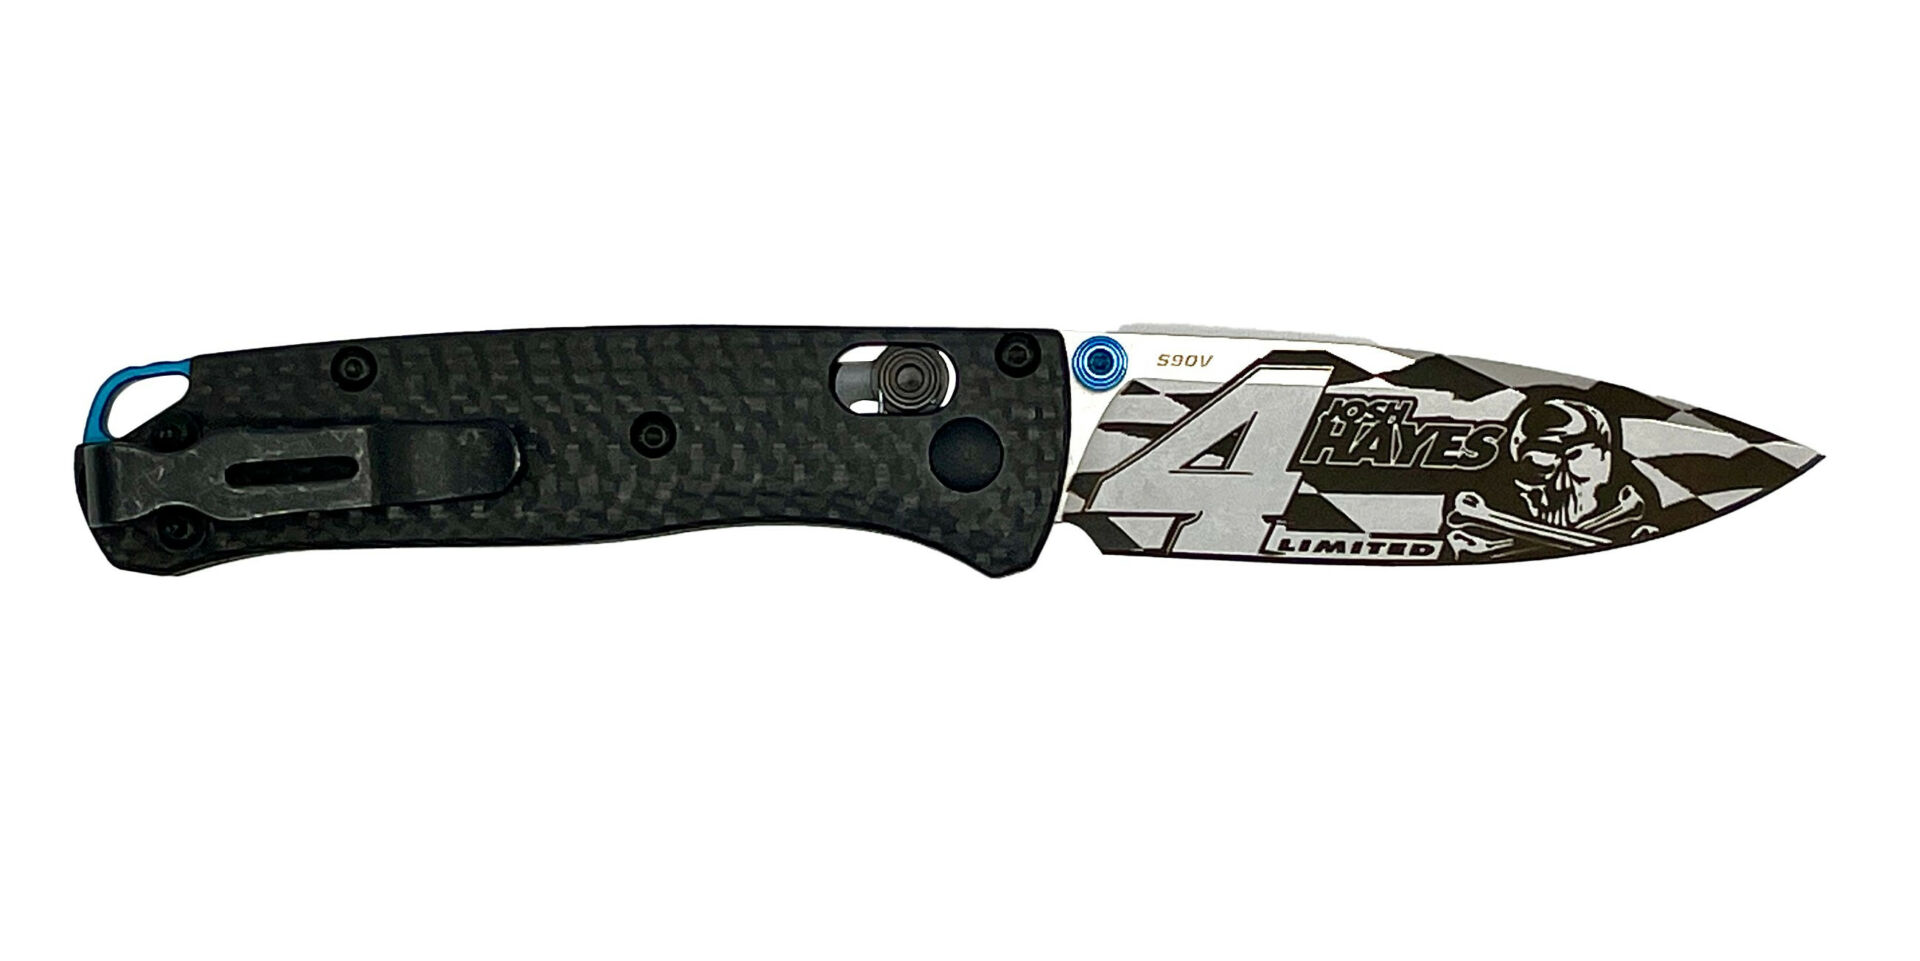 A Josh Hayes Limited Edition Carbon Fiber Benchmade Mini Bugout Pocket Knife. Photo courtesy Quinn Knives.